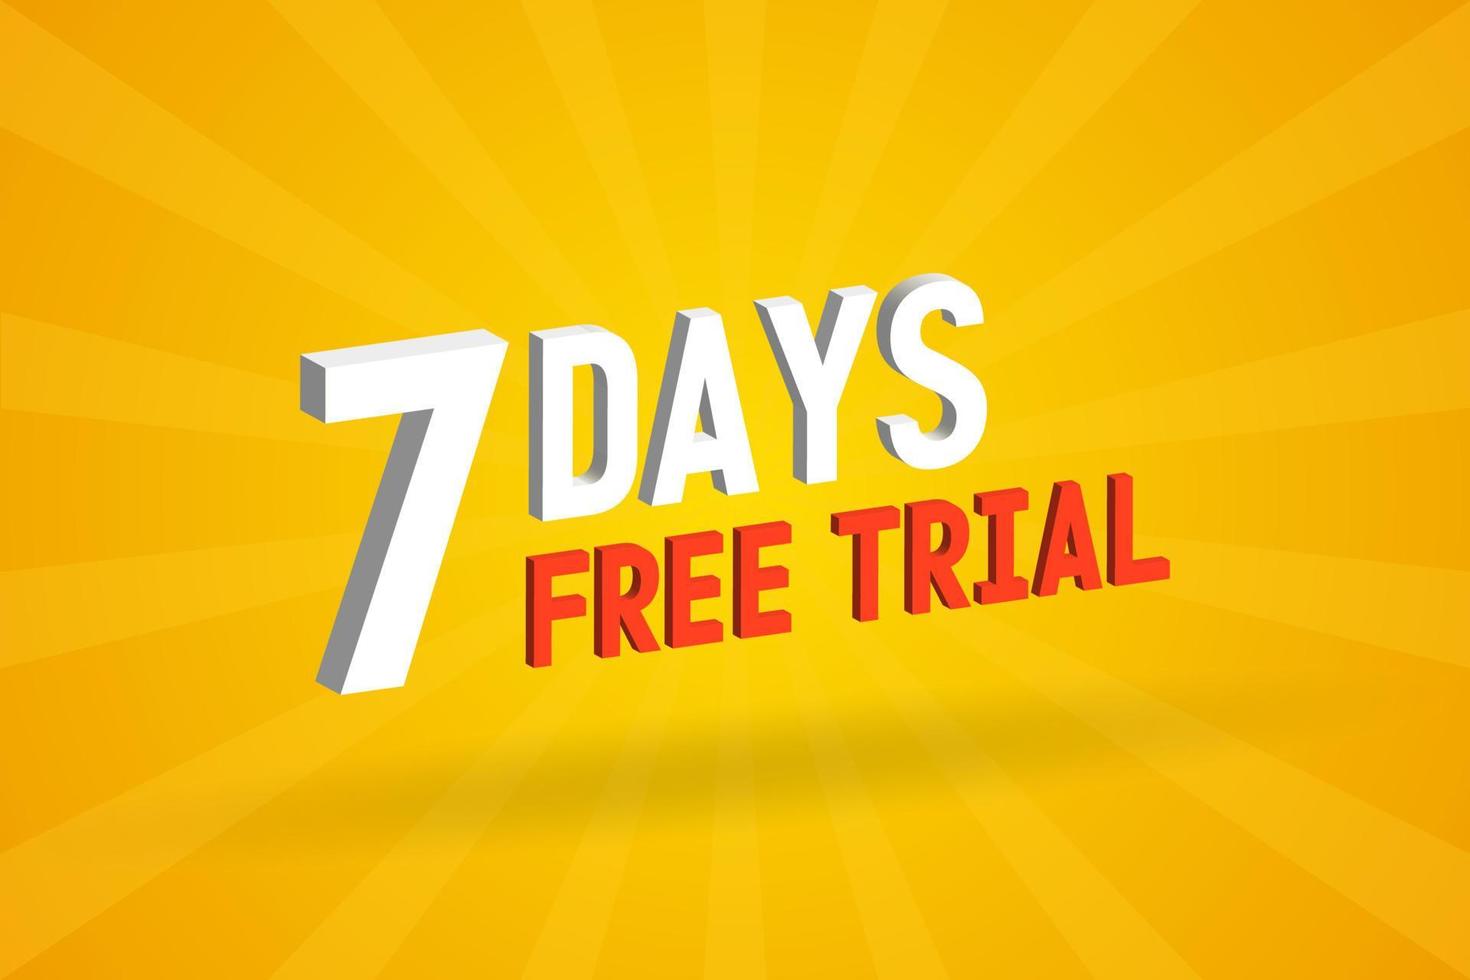 Free offer 7 Days free Trial 3D text stock vector